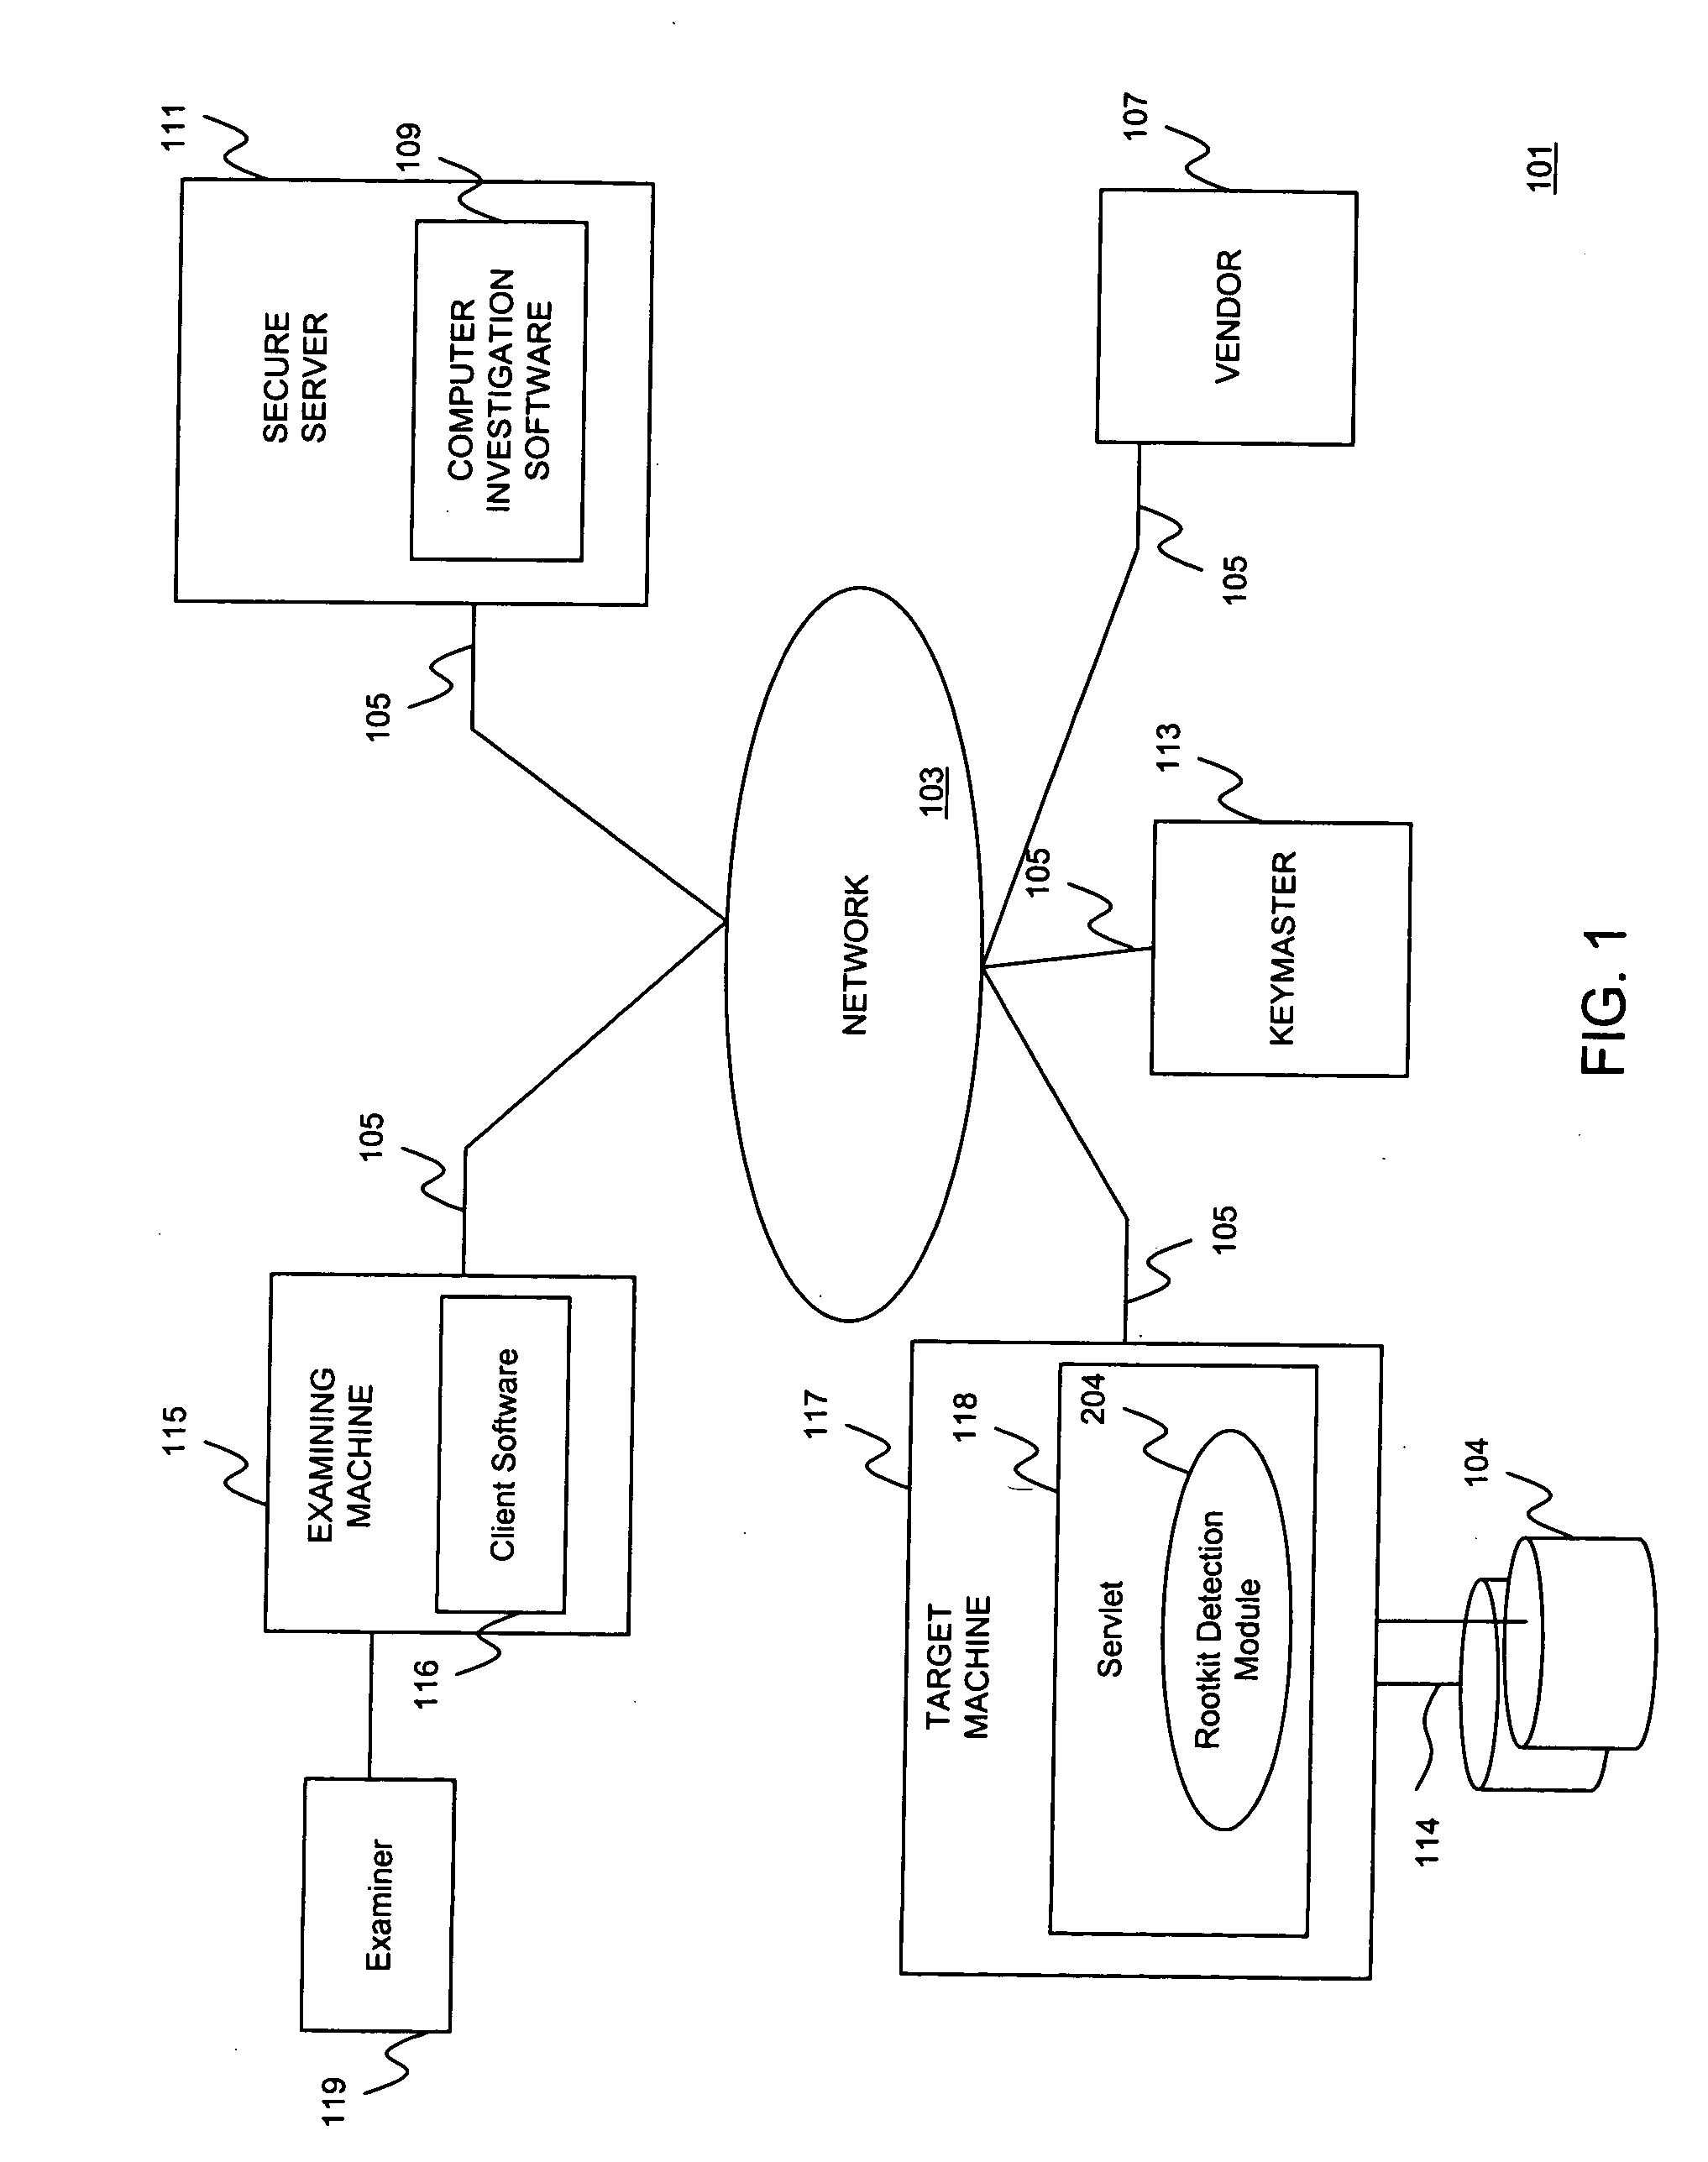 Rootkit detection system and method